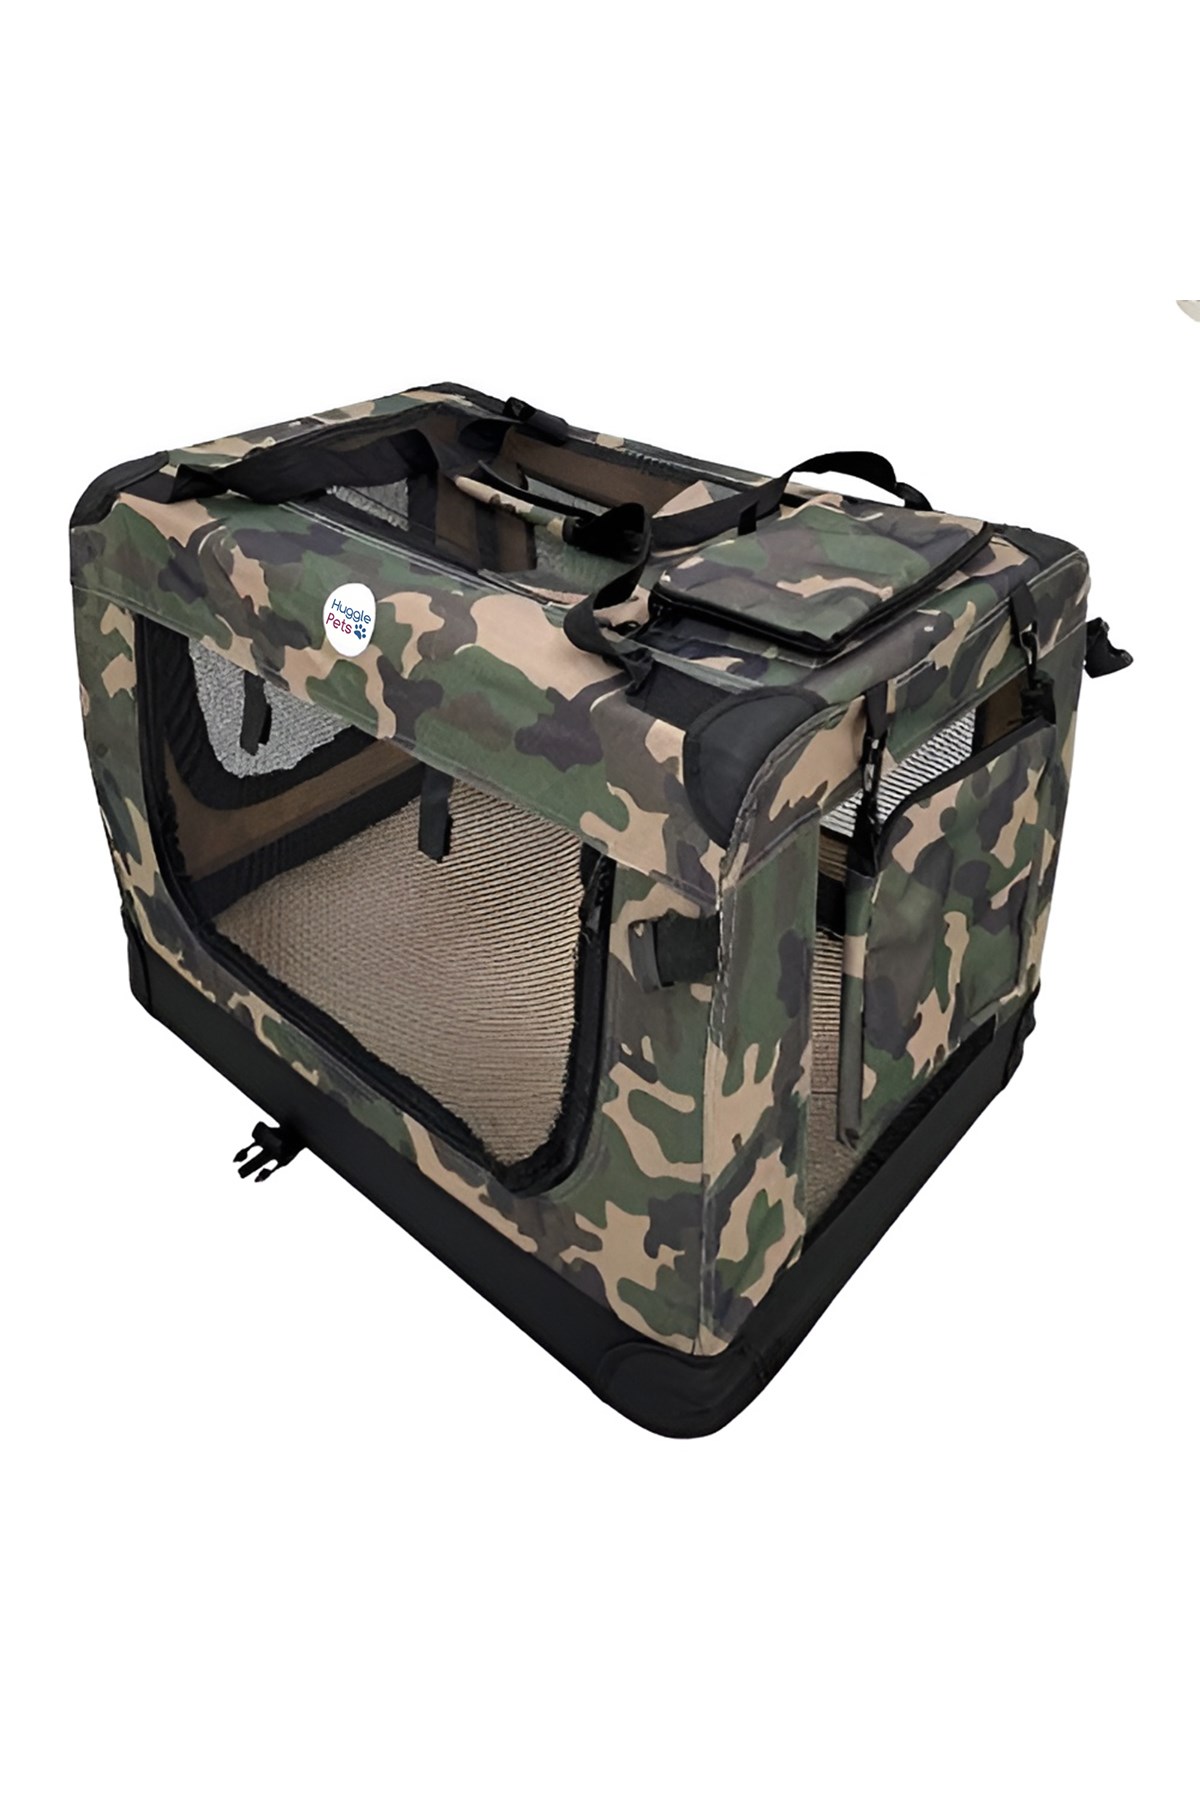 Fabric Crate Pet Carrier -